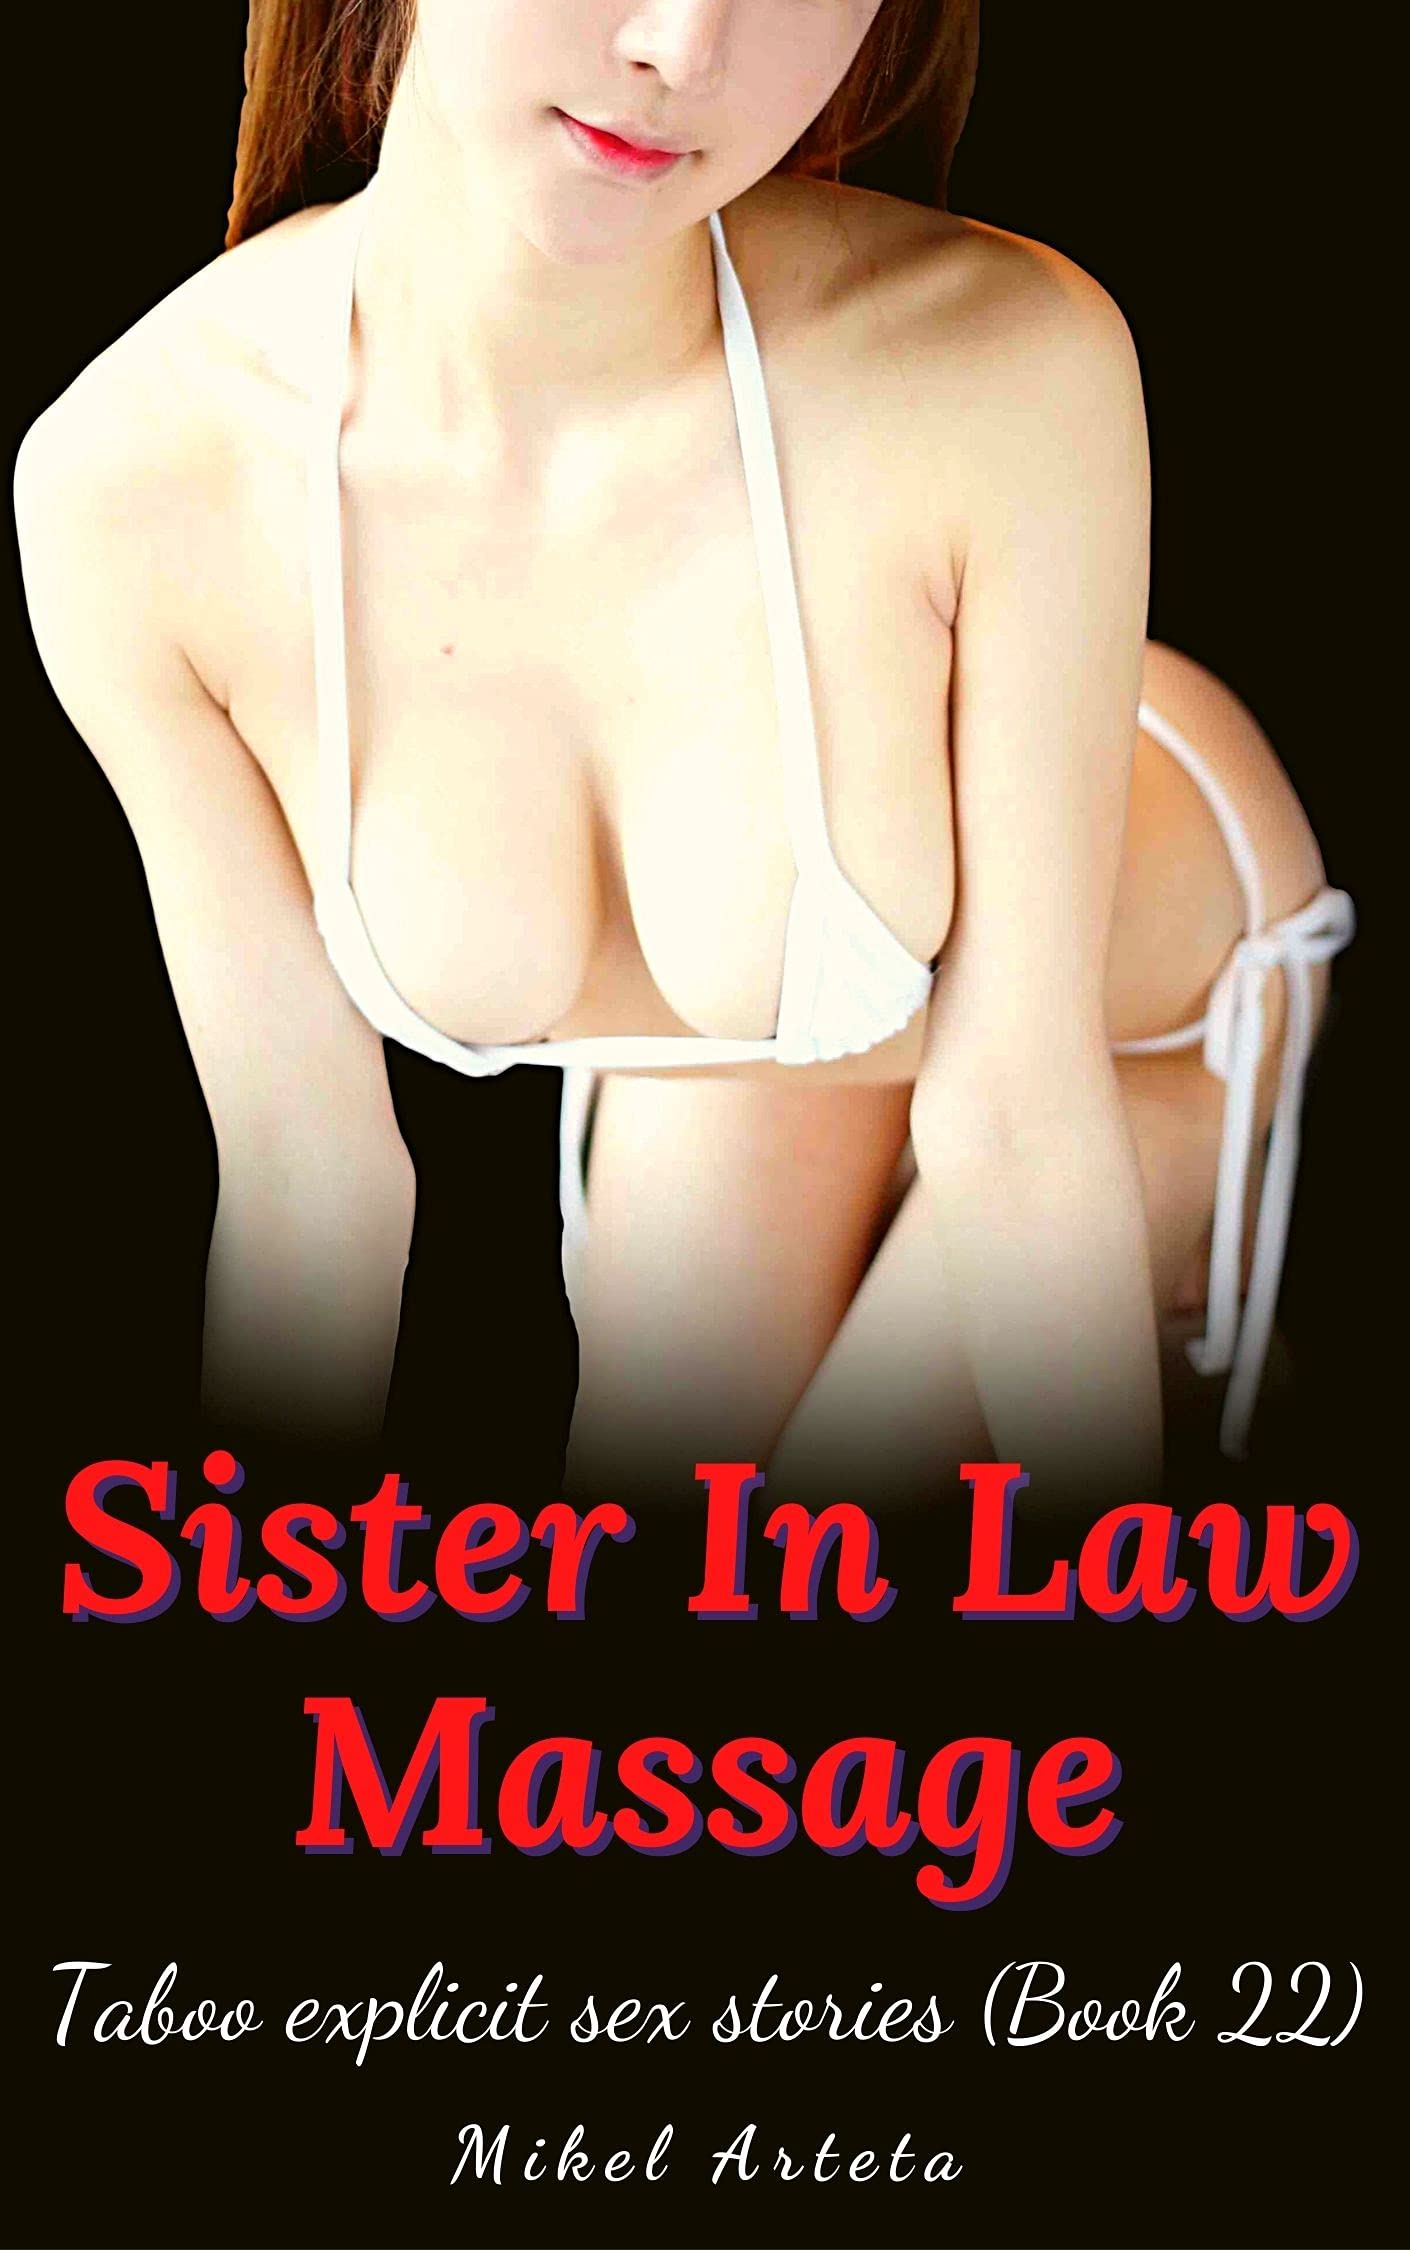 donna daniele recommends Erotic Stories Sister In Law